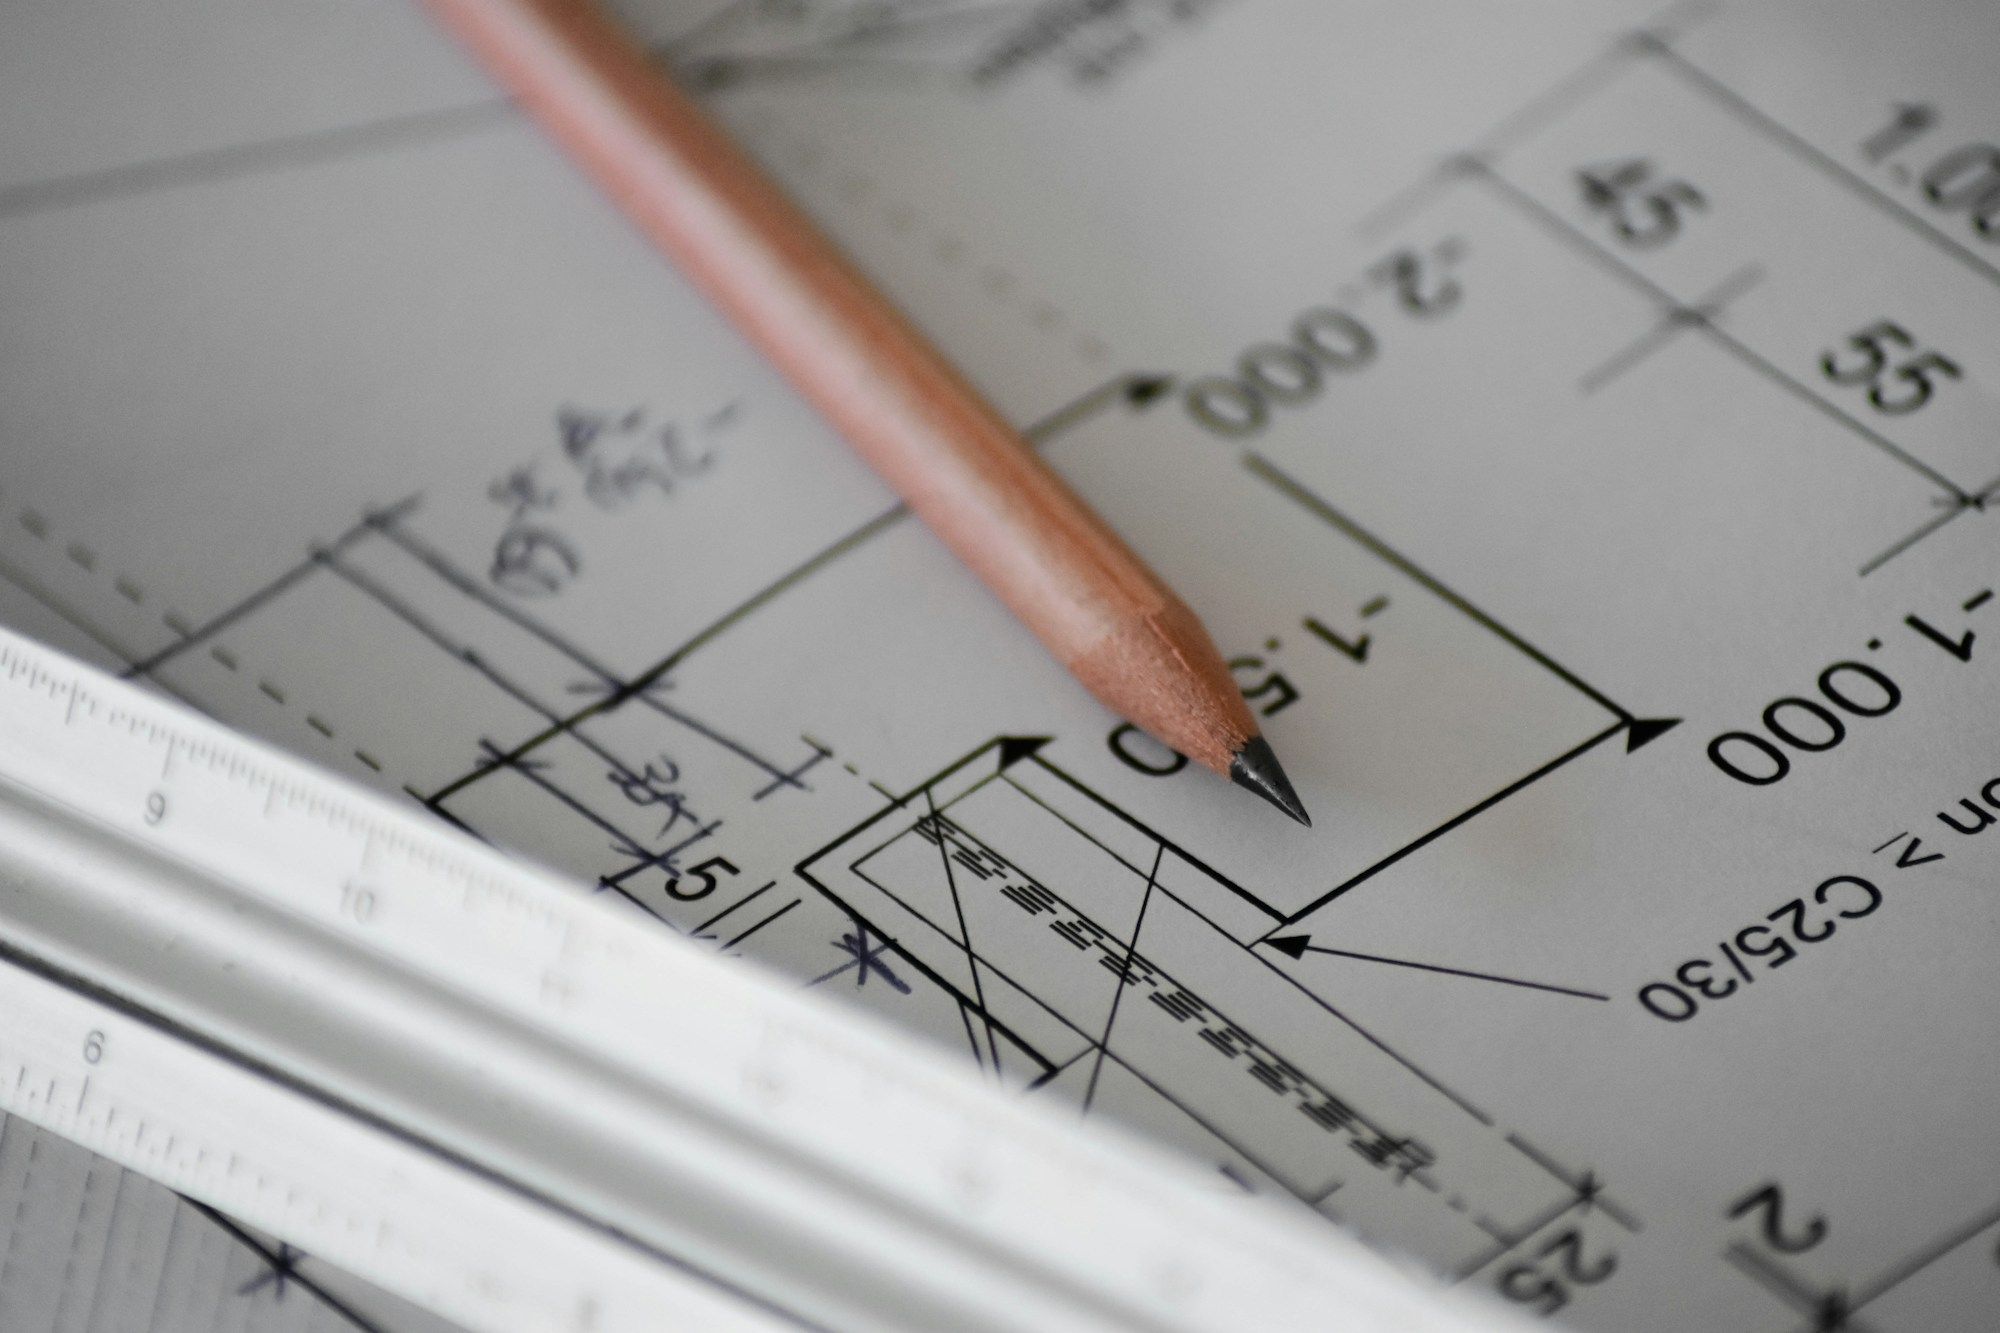 Architectural Advice, Site Design and Planning Consultants Services from Fytche-Taylor